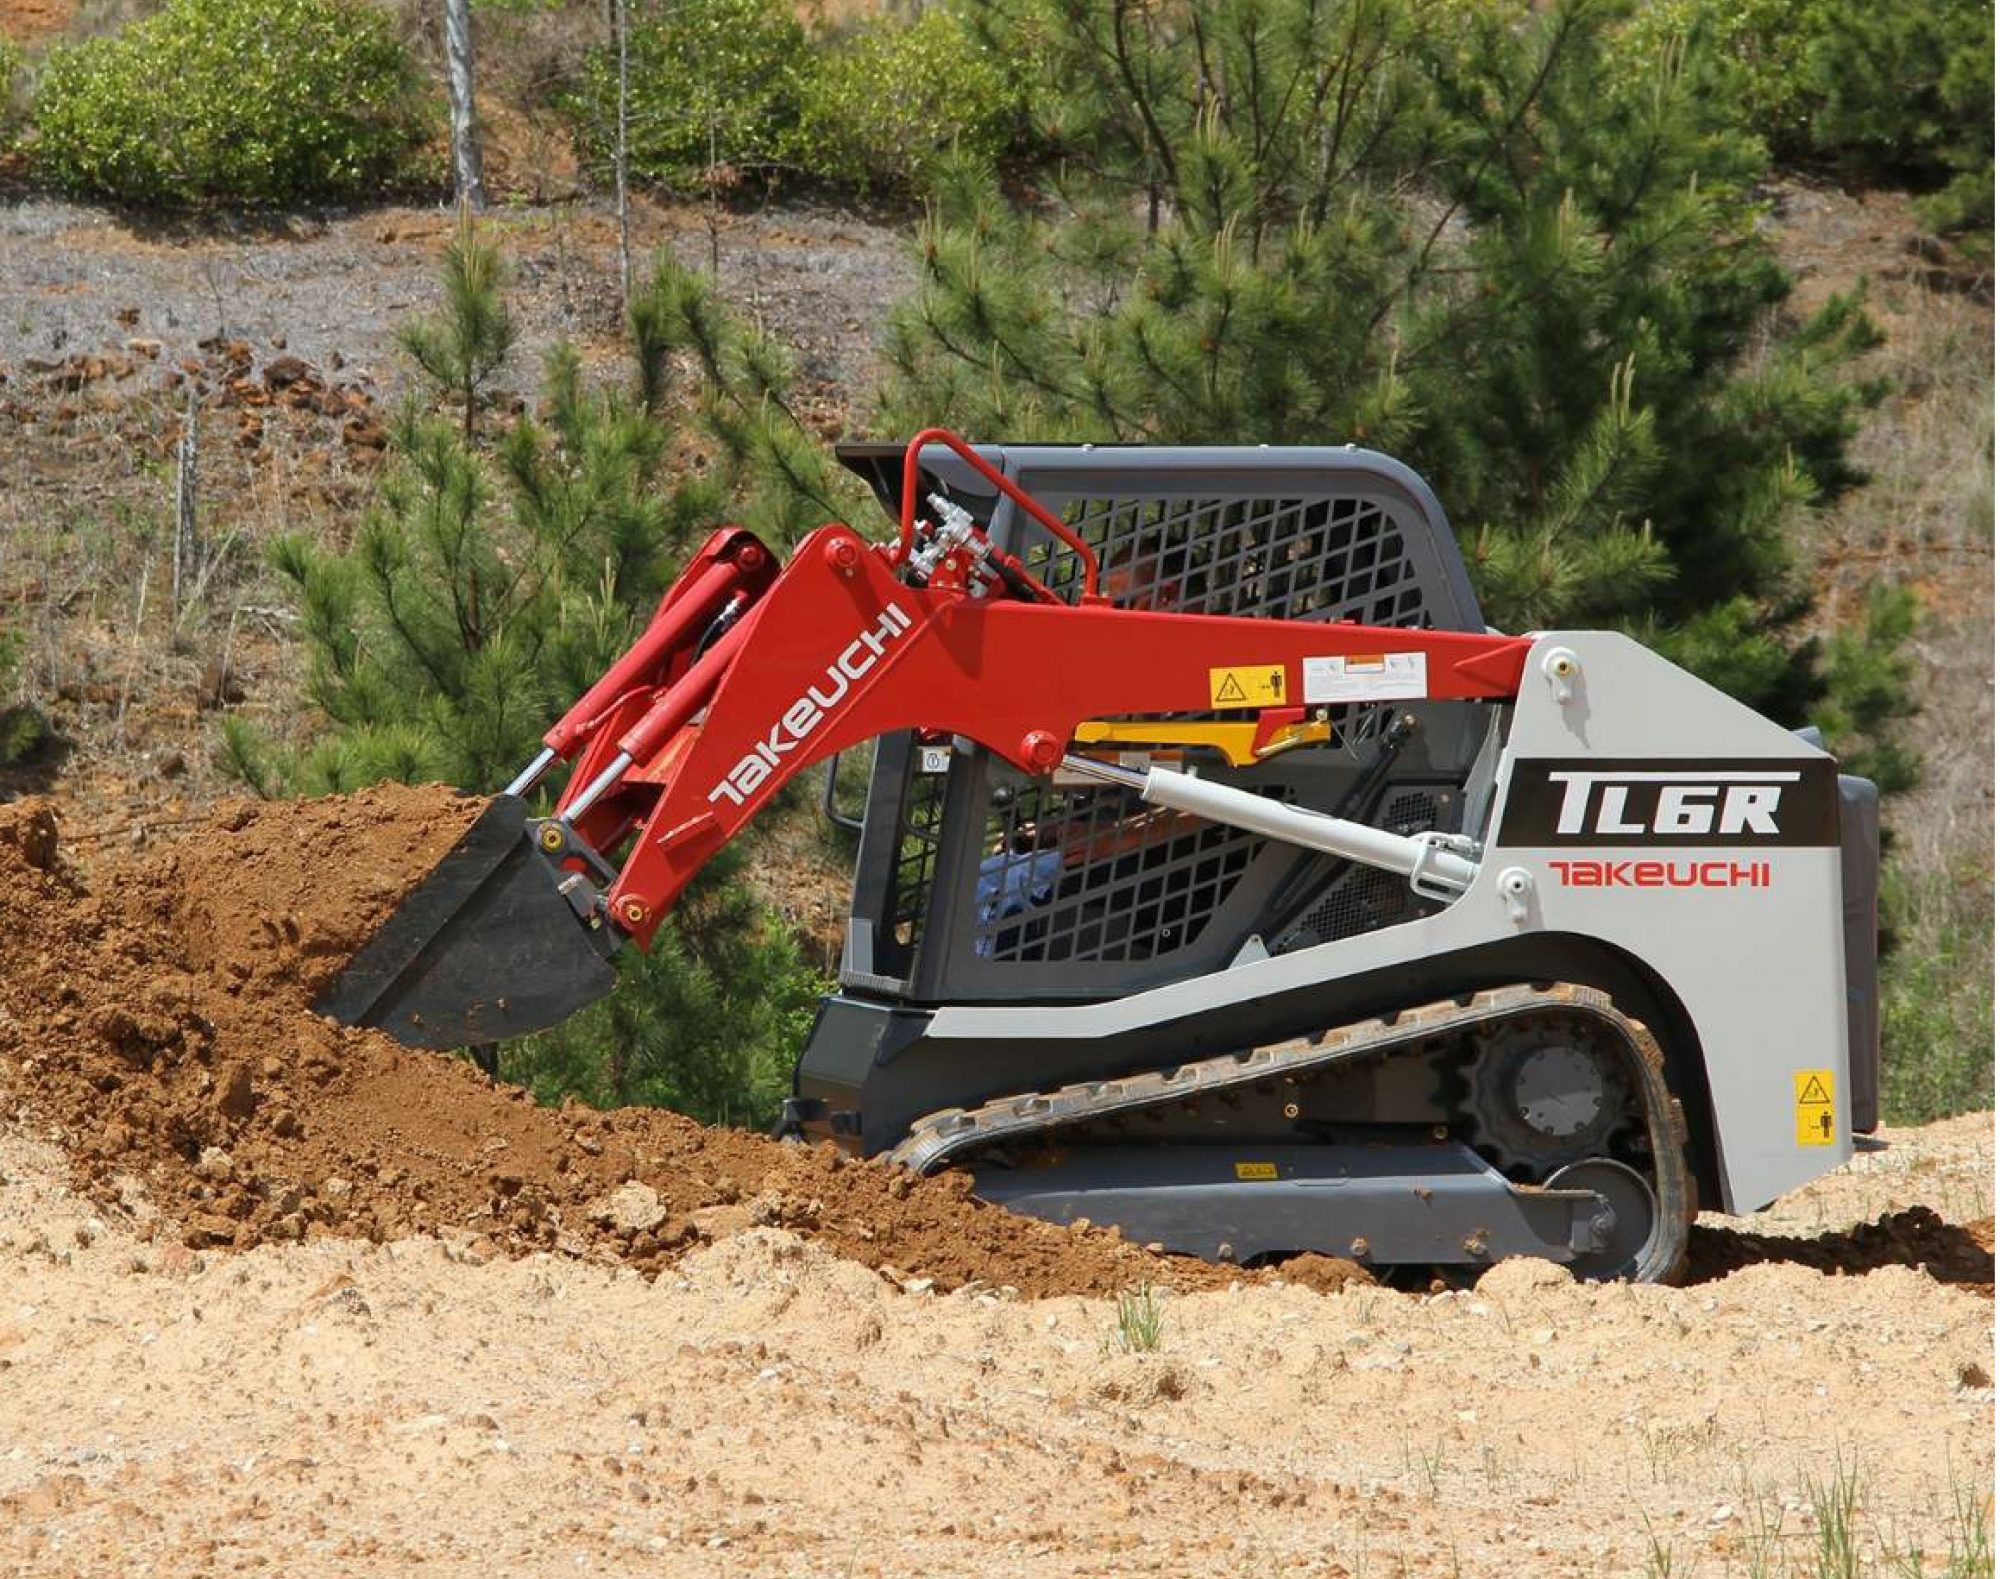 Takeuchi fleet management (TFM) system comes standard on the new TL6.